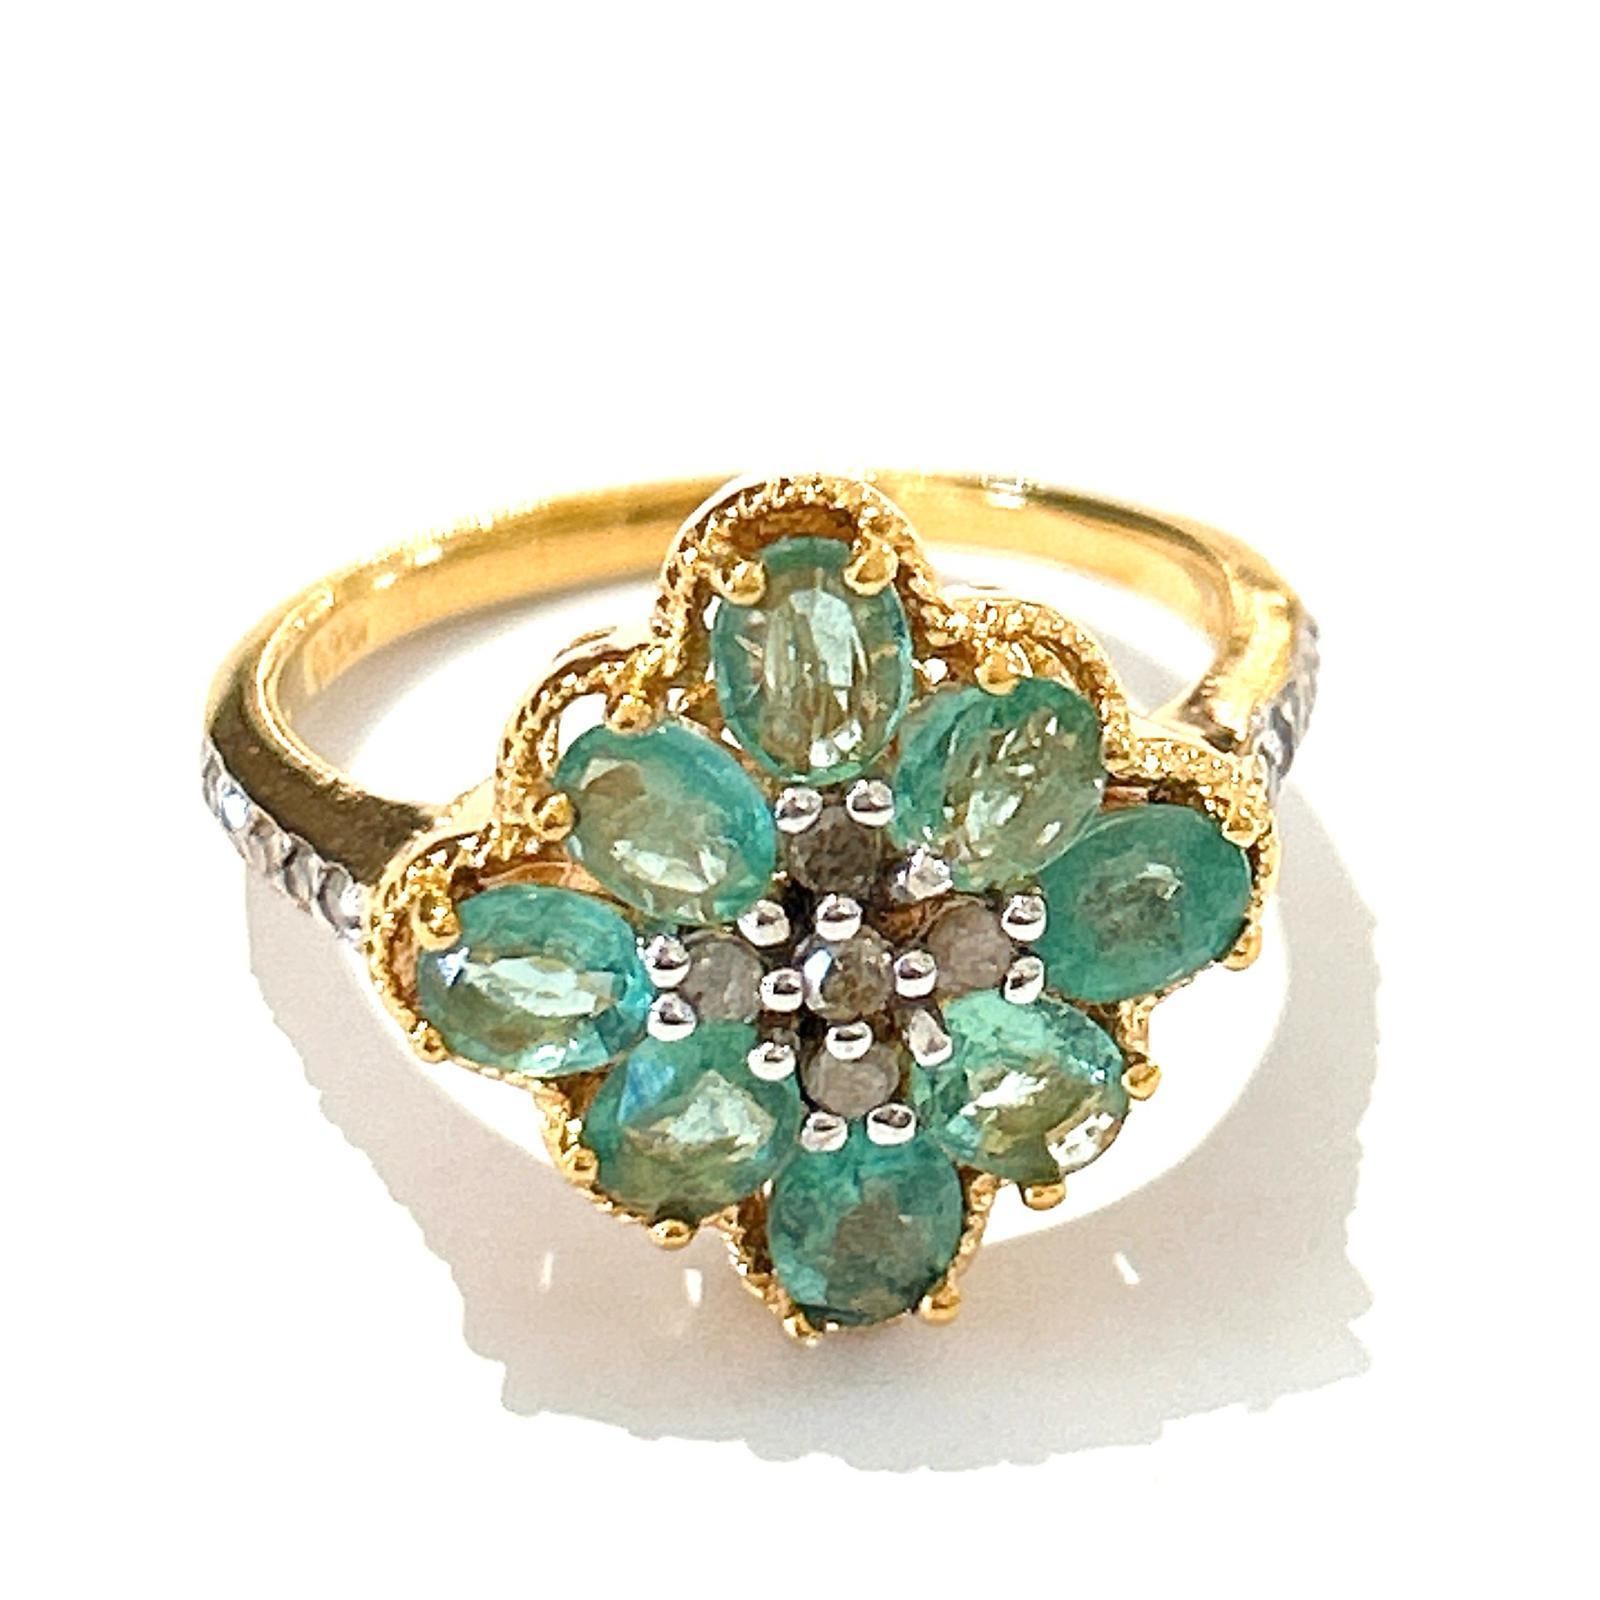 Bochic “Orient” Diamond & Emerald Vintage Cluster Ring Set  In 18K & Silver 

Single cut Gray natural diamonds  - 0.60 carat 
Oval cut green natural emeralds - 3 carats 

This Ring is from the 